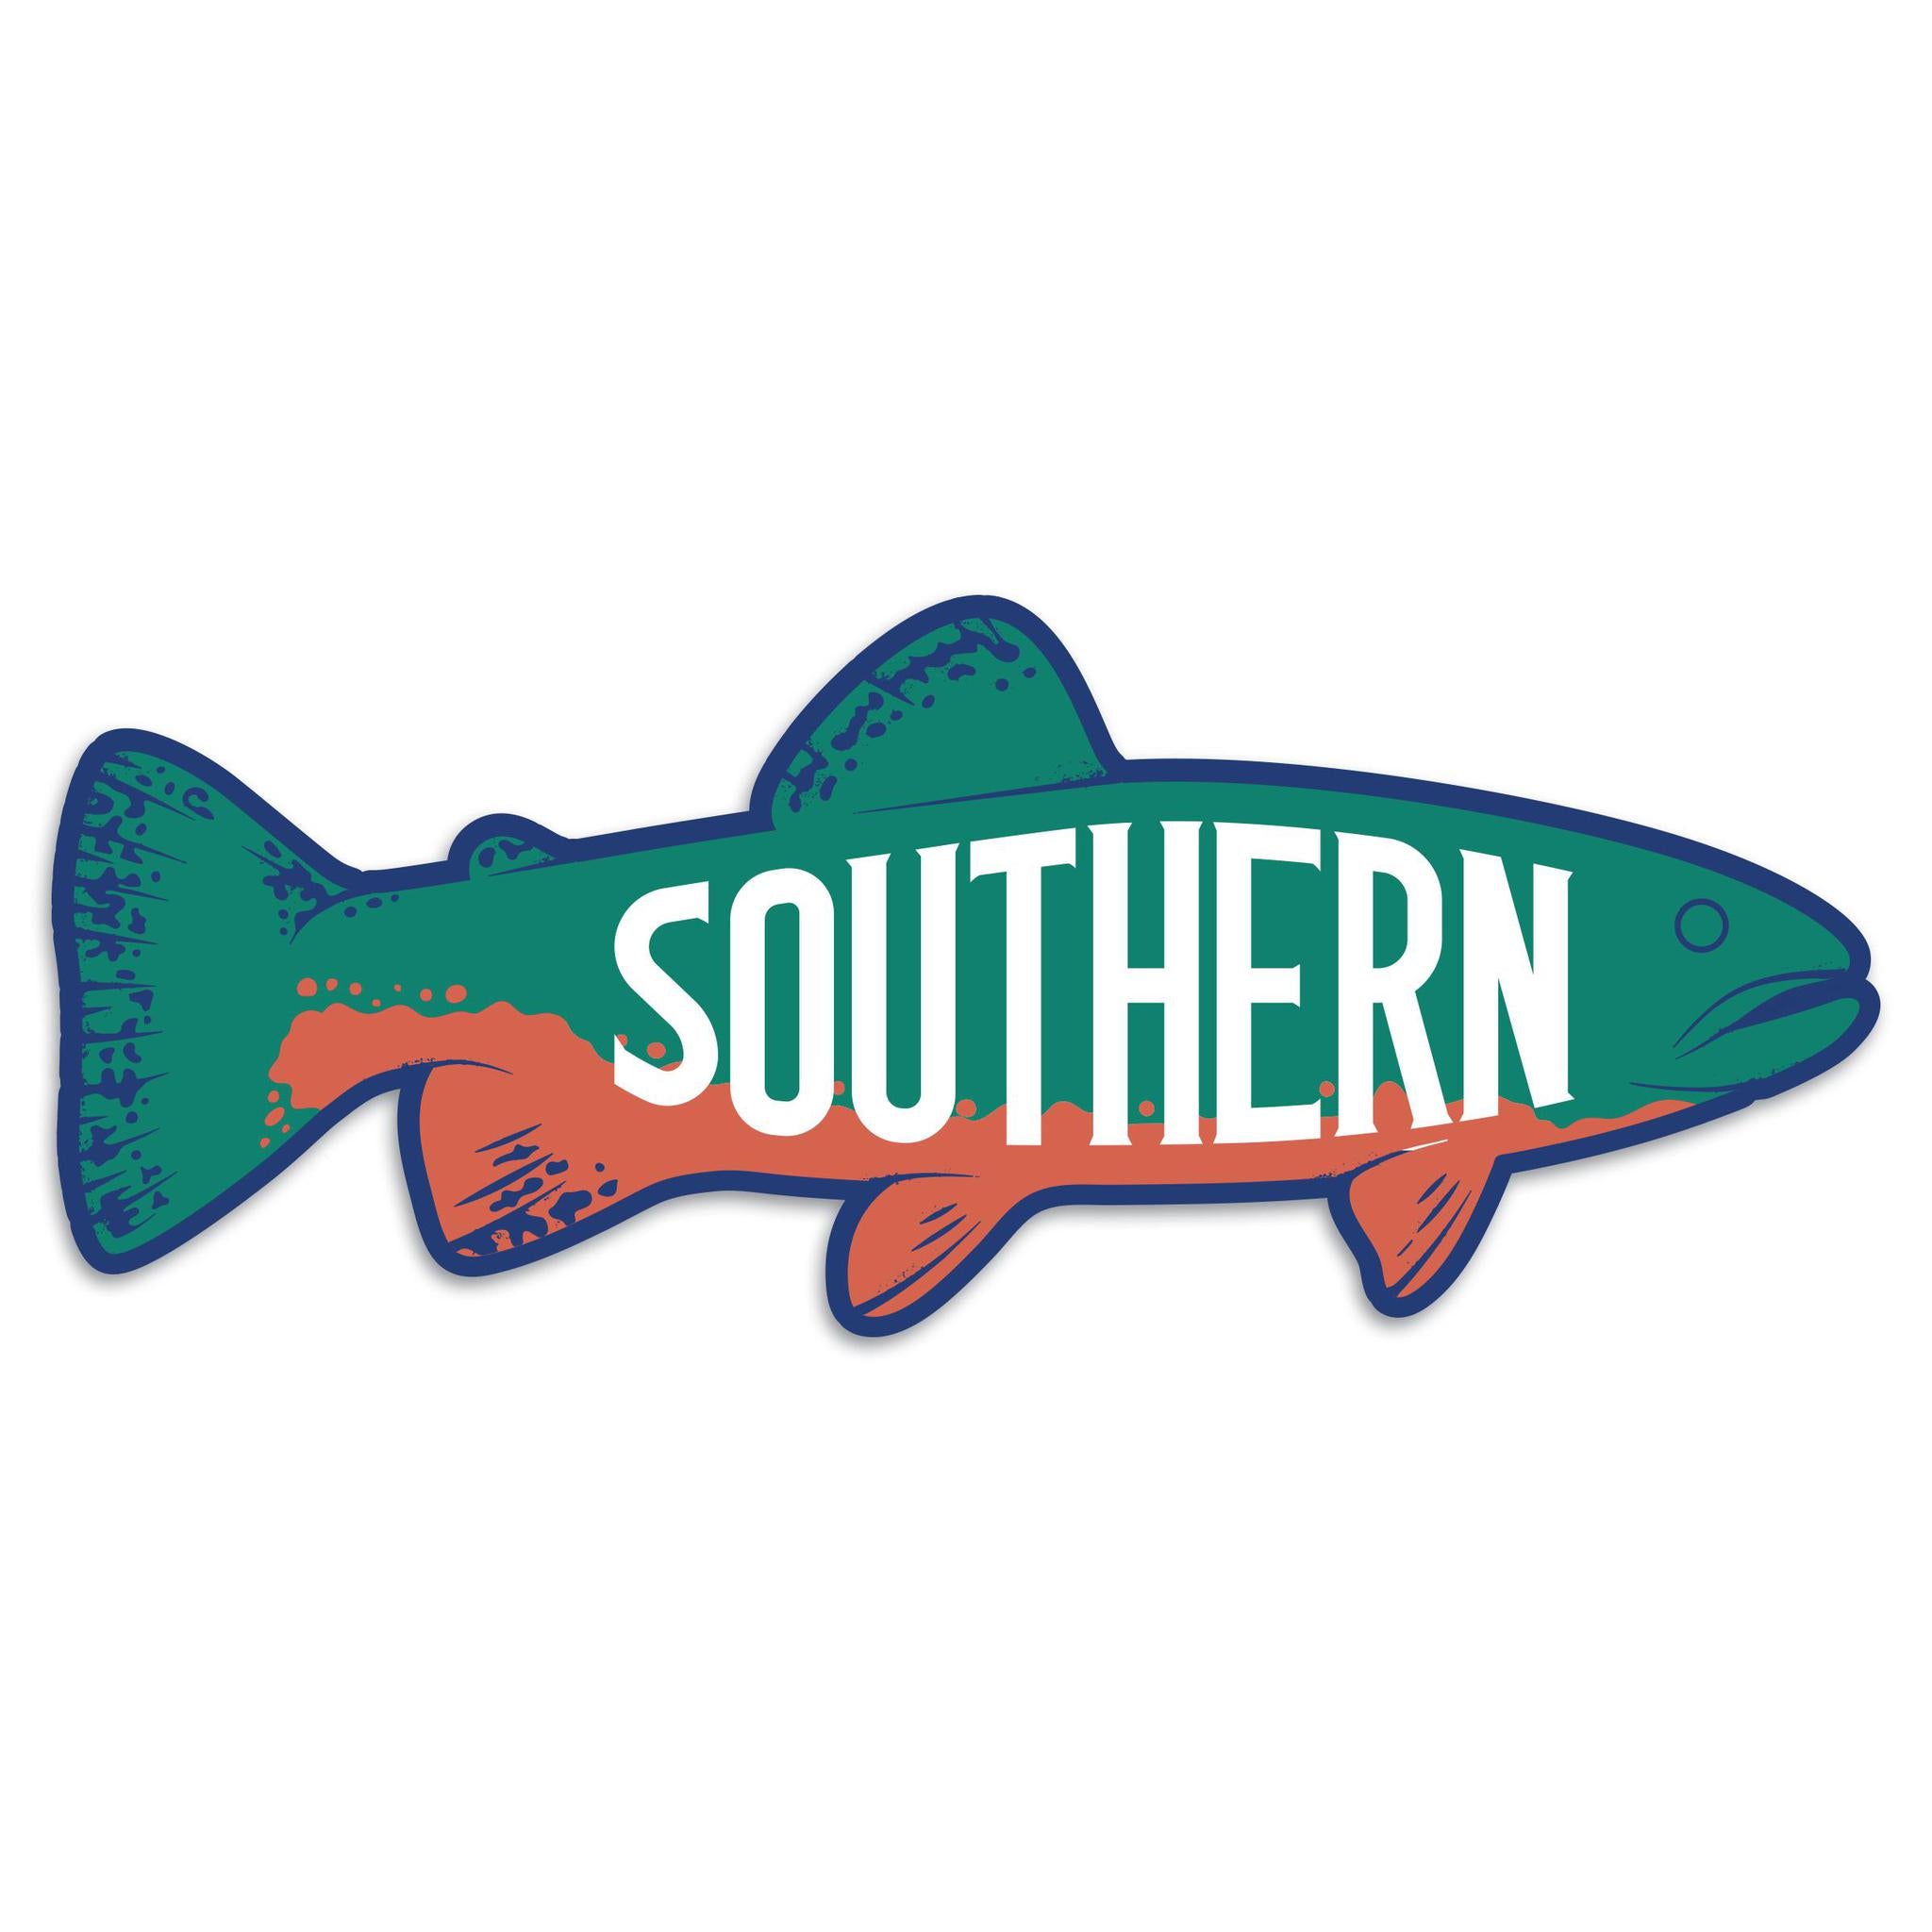 Southern Brook Sticker-Stickers-KY for KY Store